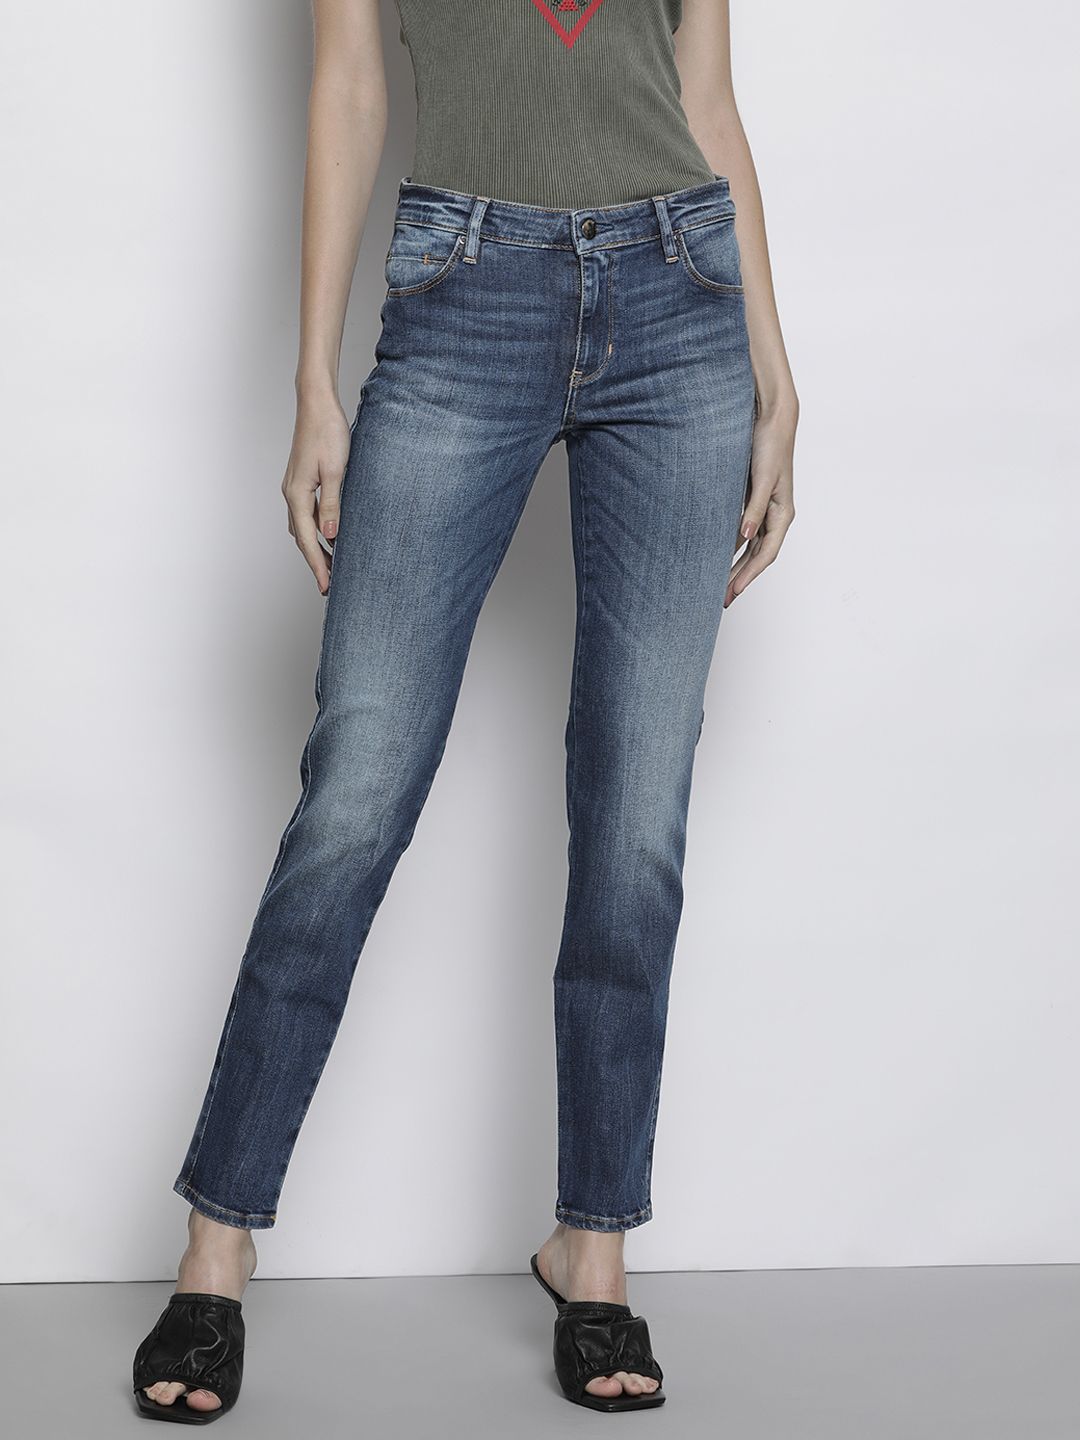 GUESS Women Navy Blue Light Fade Stretchable Jeans Price in India